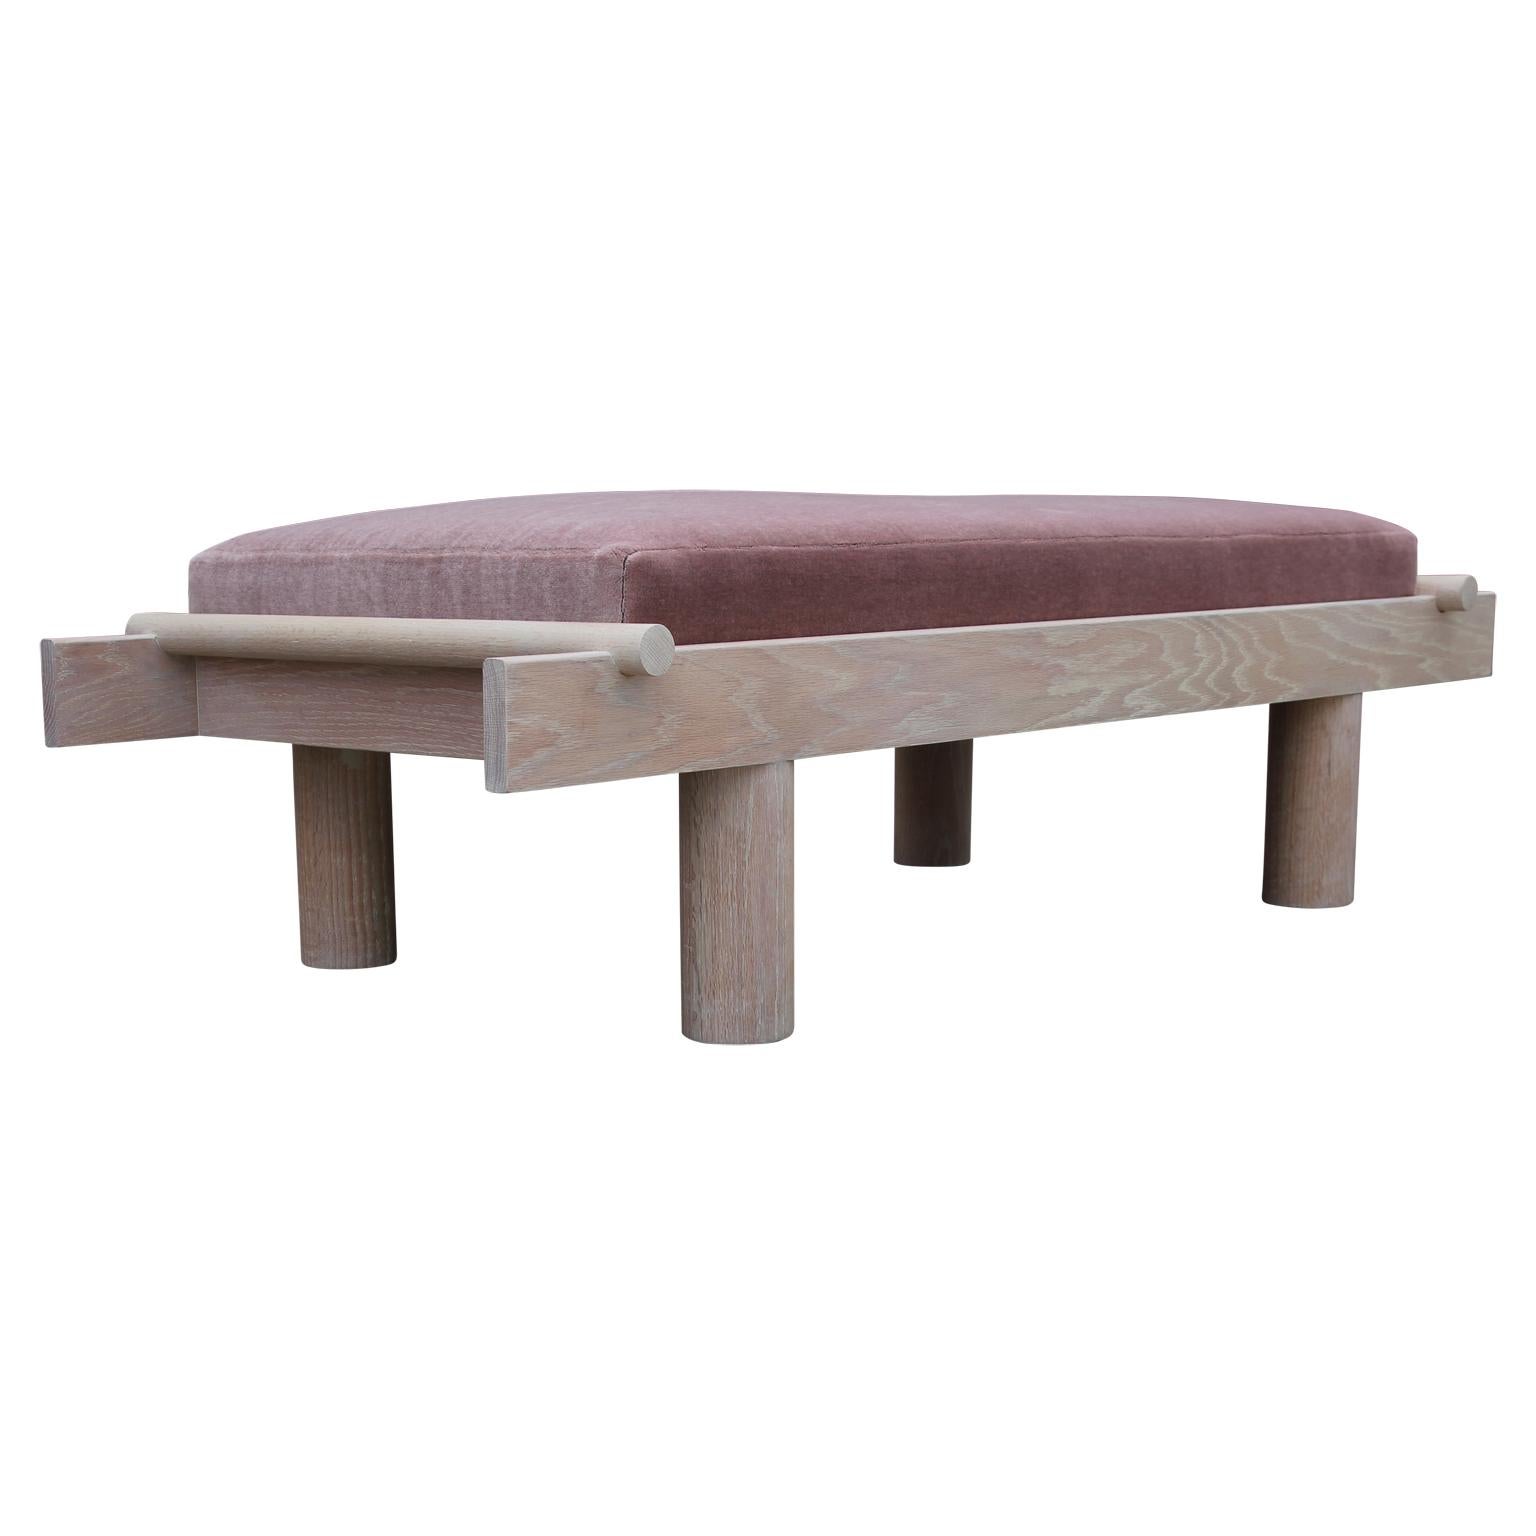 Custom made modern style bench with a unique sculptural Postmodern design. The bench is made from natural cerused oak and the cushion is upholstered in pink Kravet mohair. We can make custom sizes and finishes.